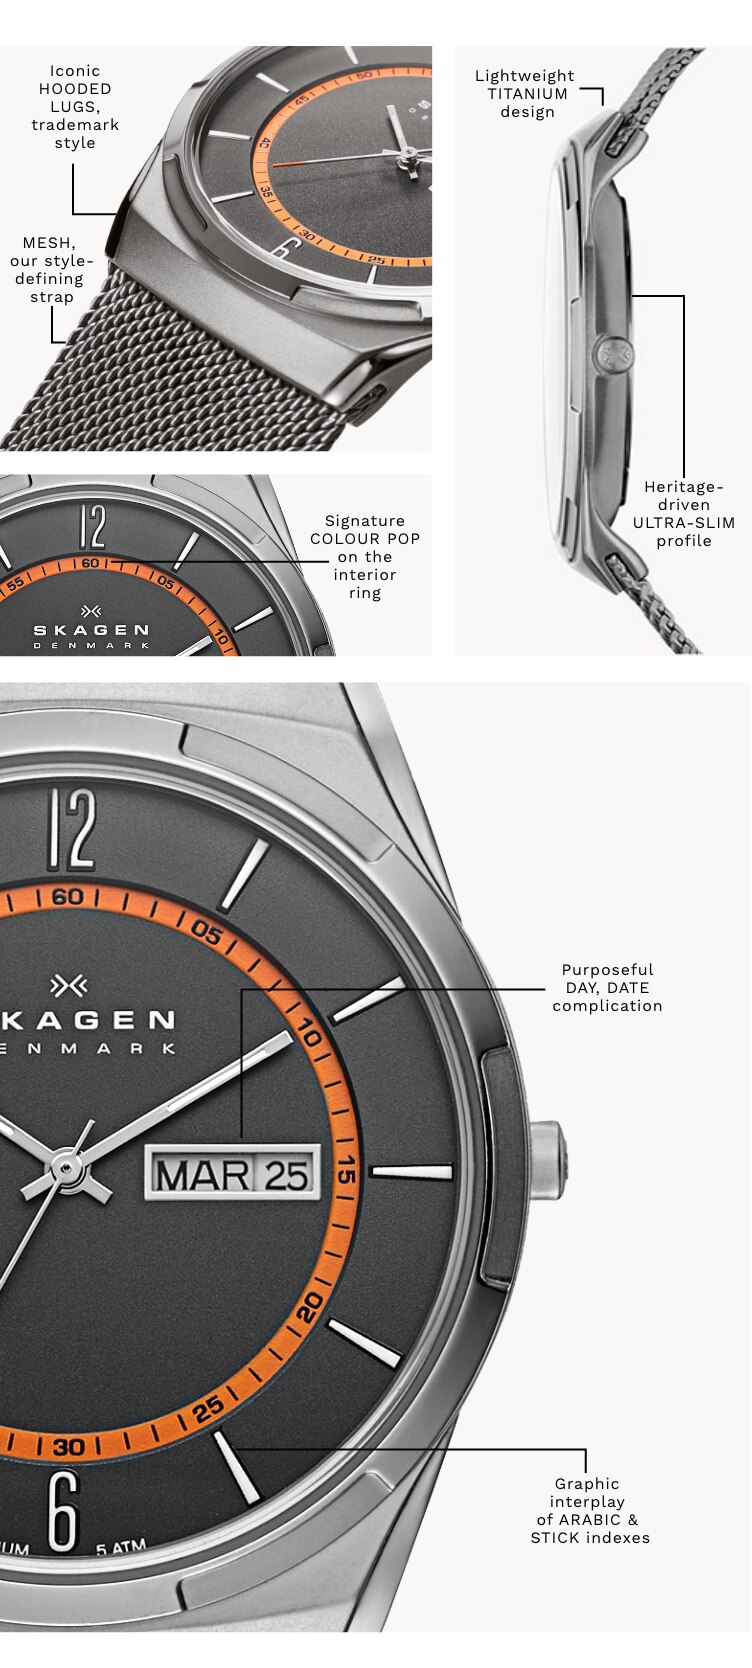 A Melbye watch with a silver-tone case with matching mesh strap with black dial and orange inner ring. Has the following call-outs on it: ‘Signature COLOUR POP on the interior ring’ ‘Purposeful DAY, DATE complication’ ‘Graphic interplay of ARABIC & STICK indexes’. ‘Iconic HOODED LUGS, trademark style’ ‘Lightweight TITANIUM design’ ‘Heritage-driven ULTRA-SLIM profile’ ‘MESH, our style-defining strap’